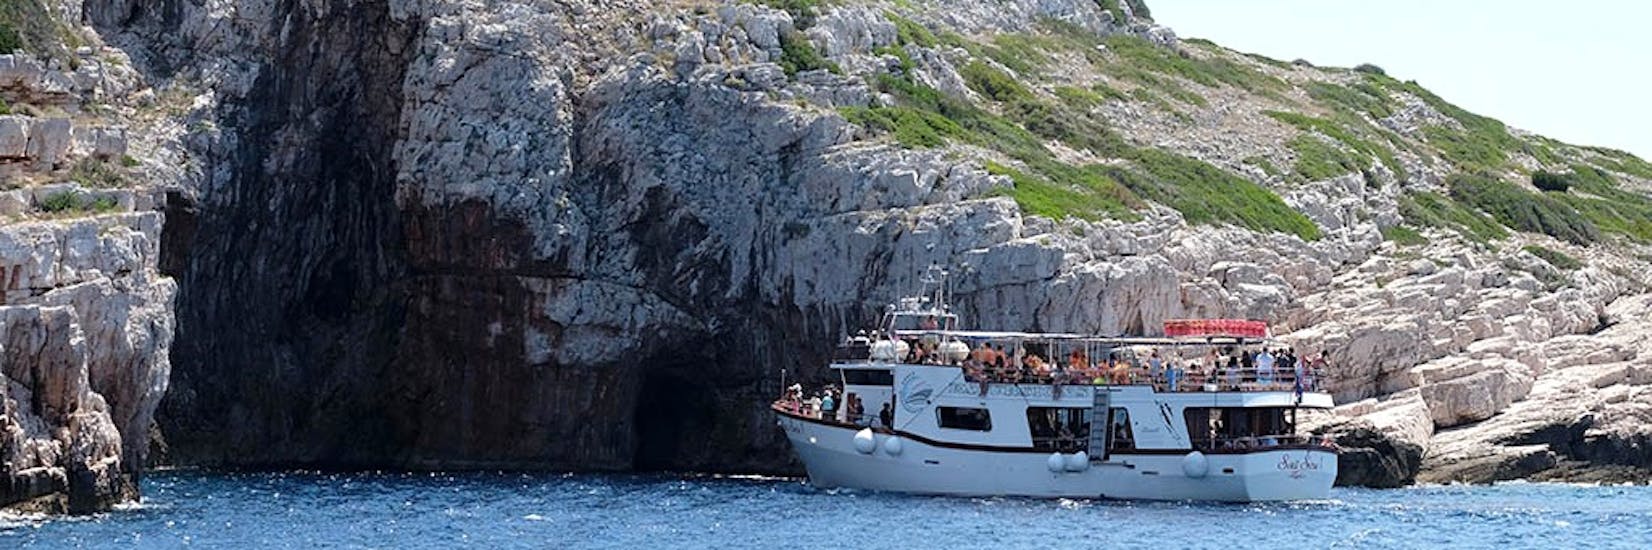 Navigating next to the cliffs during the Boat Trip to the Kornati Islands of Dugi Otok & Katina with Maslina Excursions Biograd.